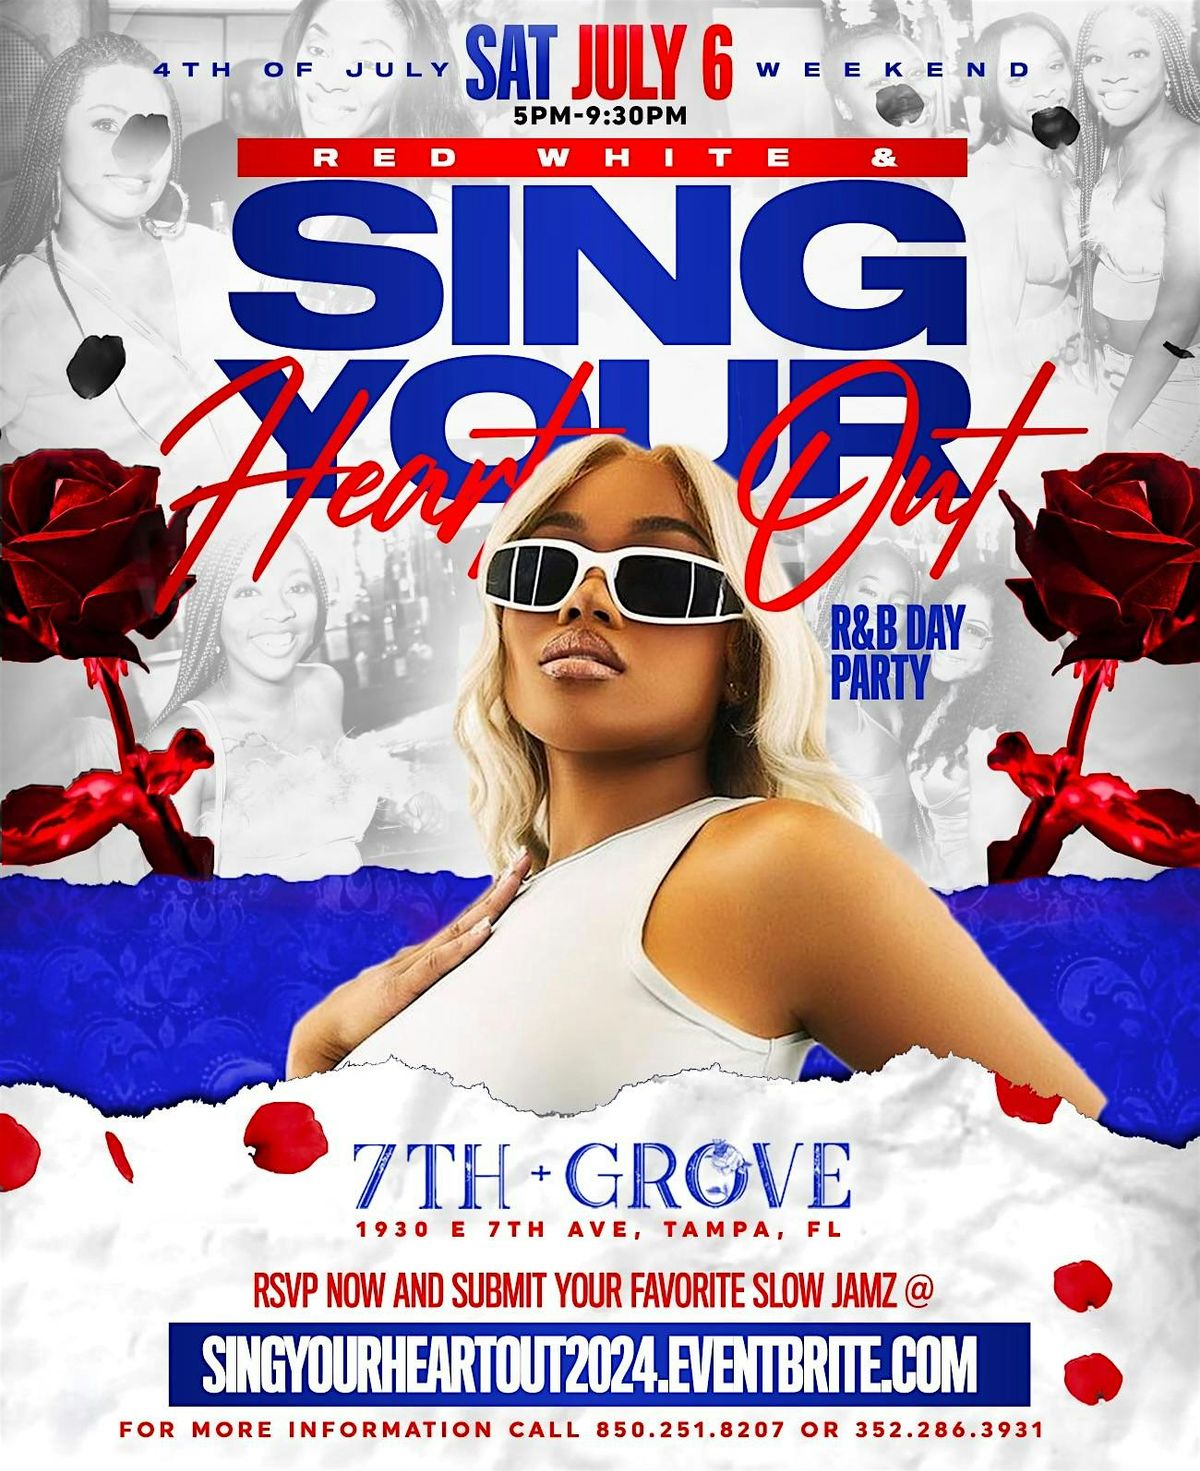 RED WHITE & SING YA HEART OUT TAMPA - 4TH OF JULY WEEKEND DAY PARTY!